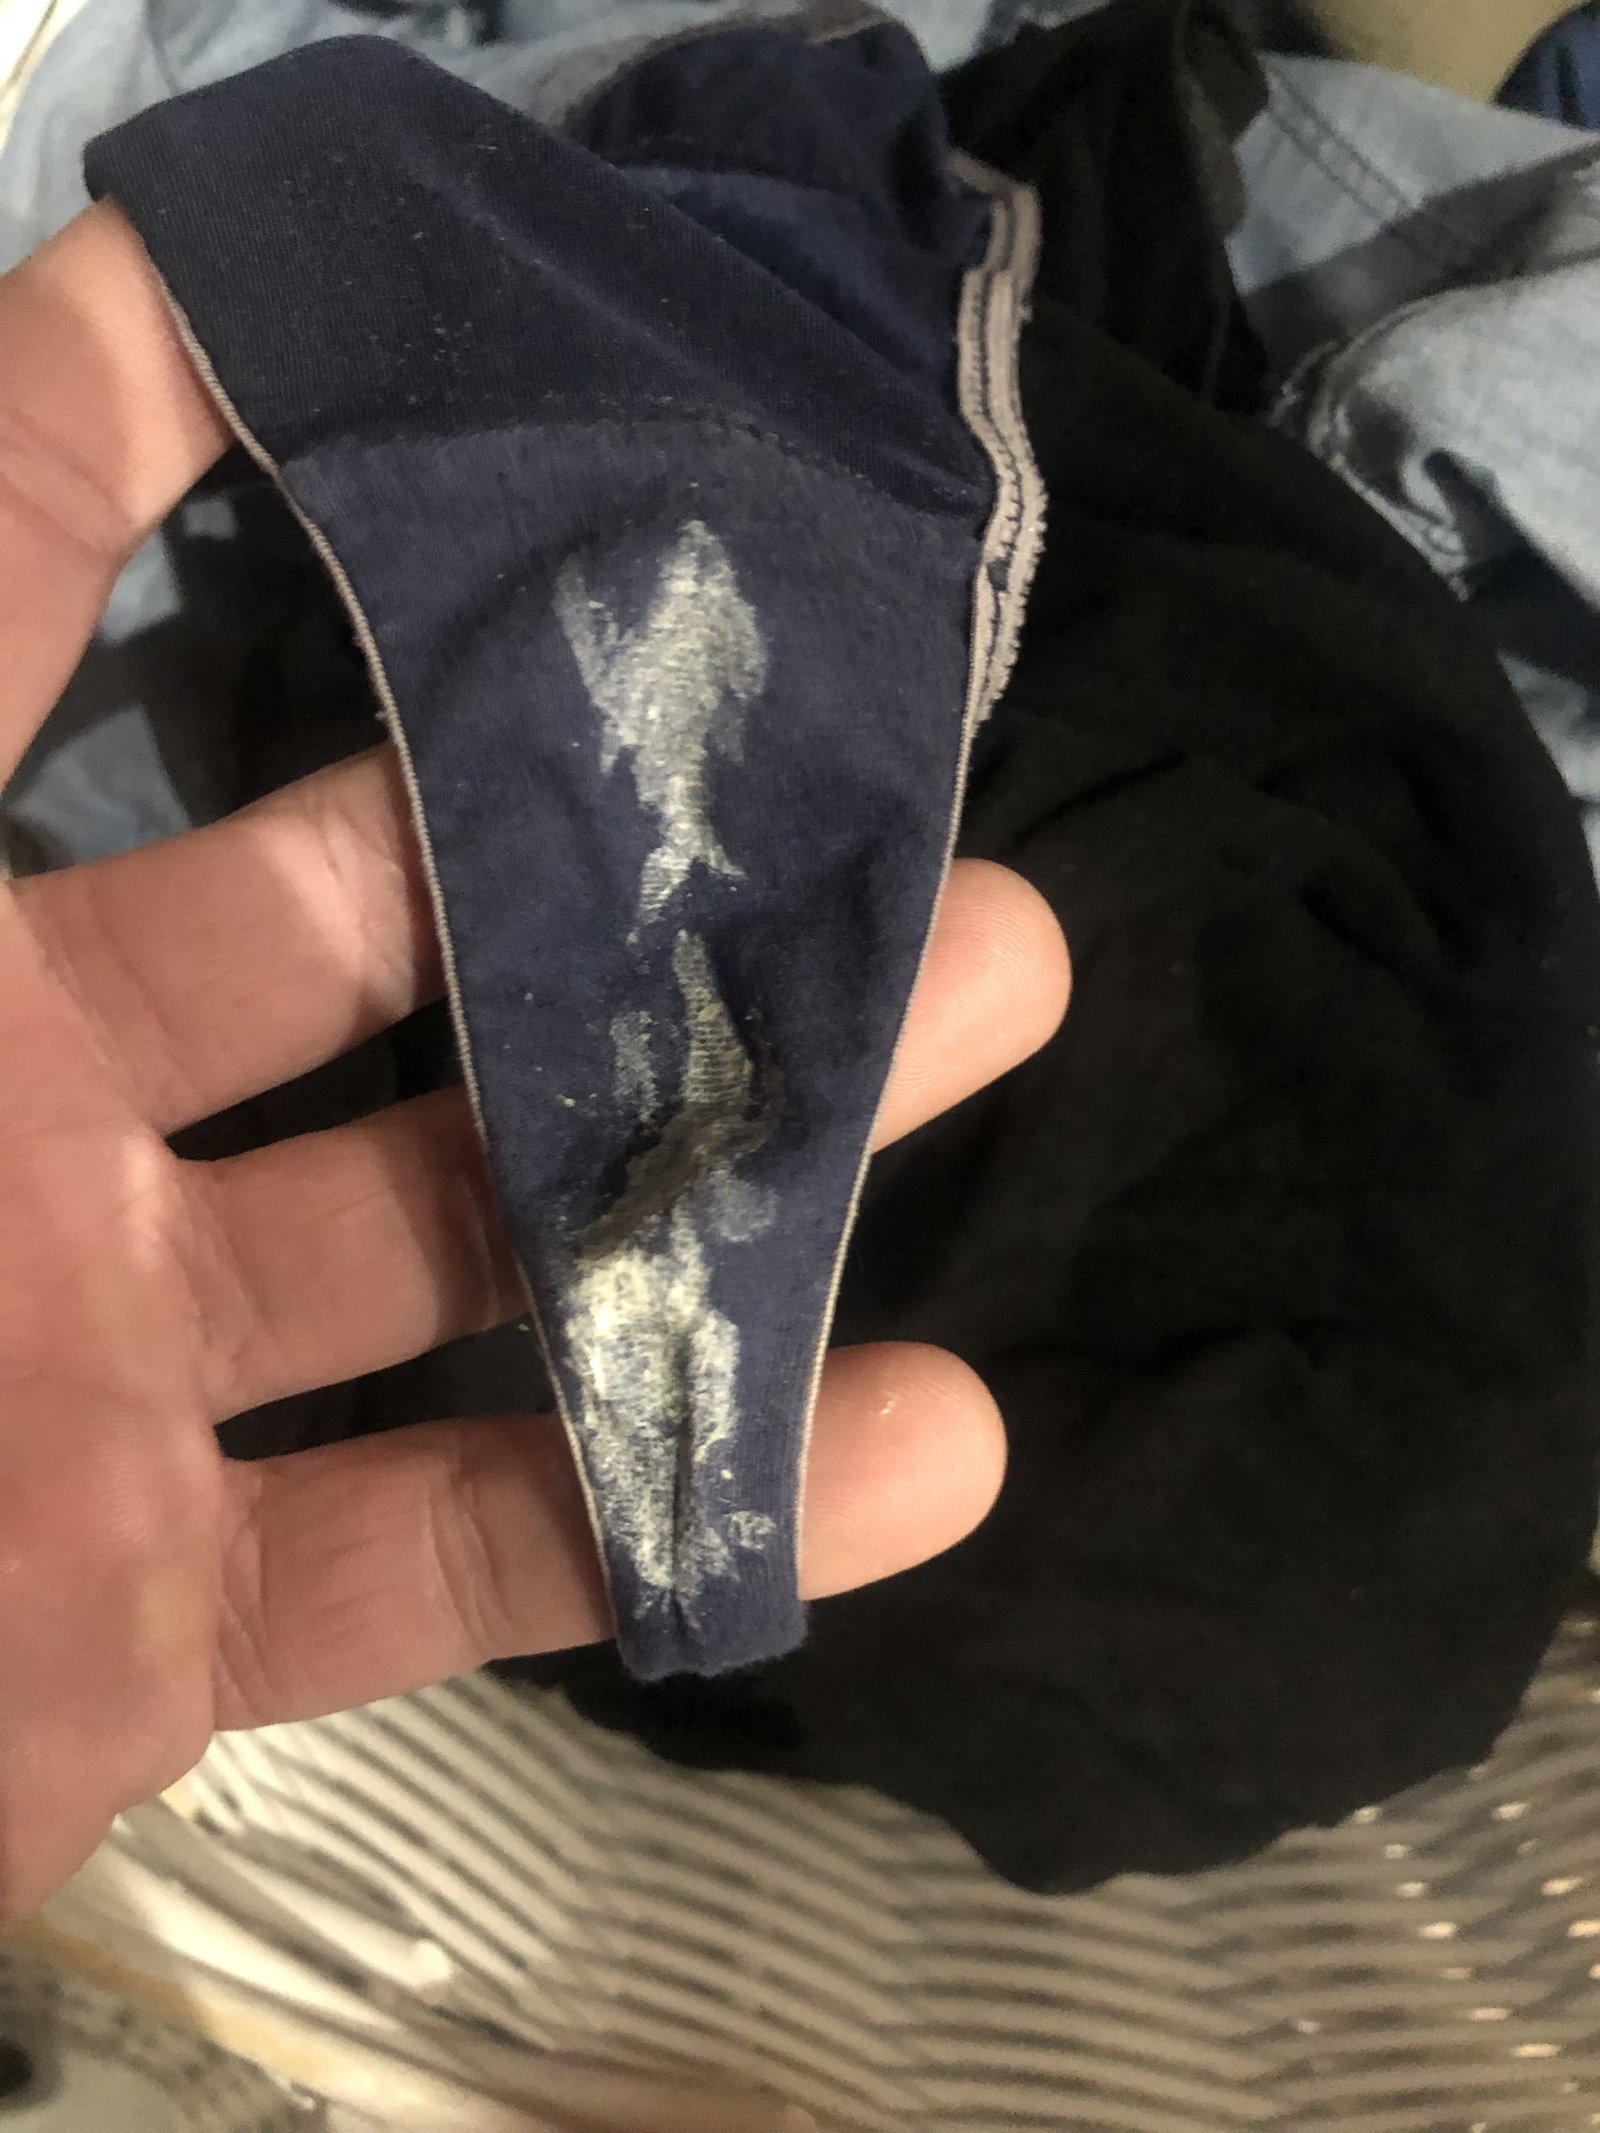 Photo by Cheatingwife101 with the username @Jkd082,  July 11, 2019 at 11:35 PM. The post is about the topic Cum panties and the text says 'Wifes panties for a day, normal or cum??'